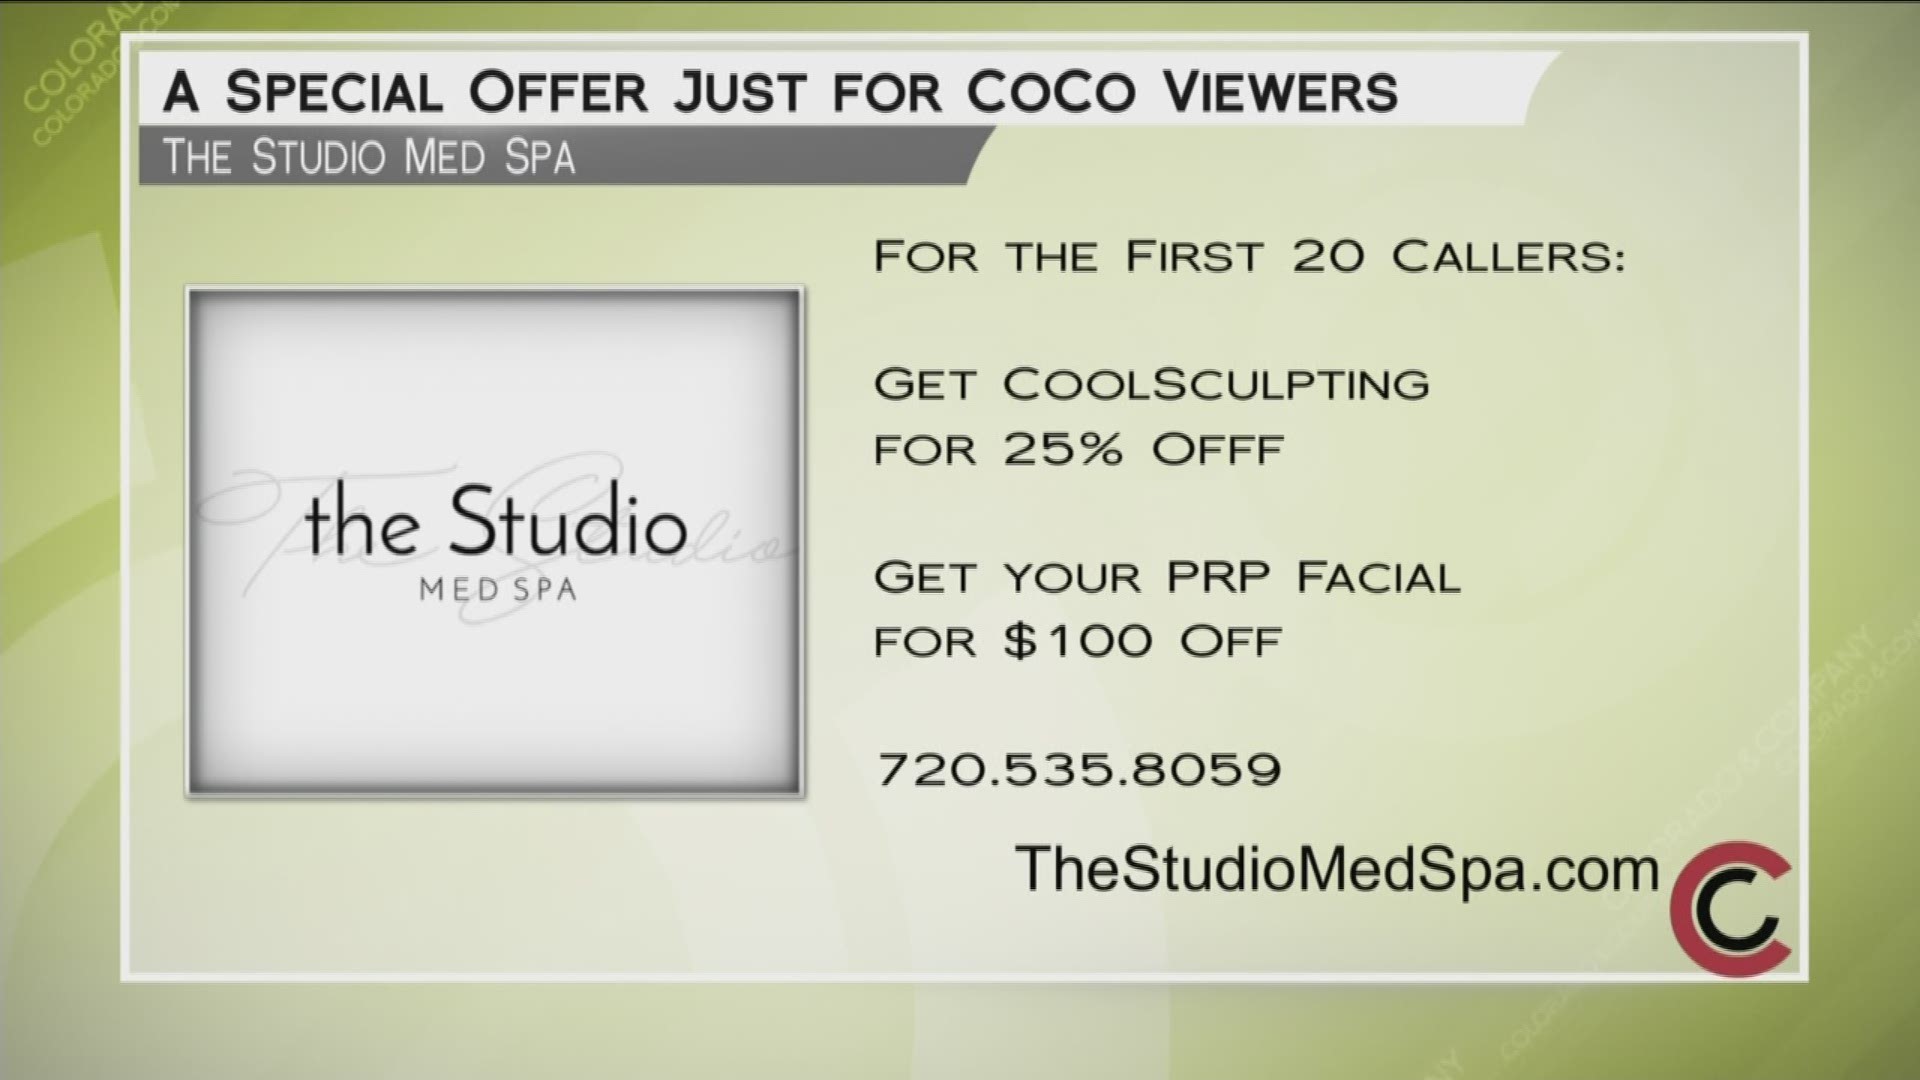 Give the Studio Med Spa a call at 720.535.8059 or visit TheStudioMedSpa.com to find out how they can help you look your best.